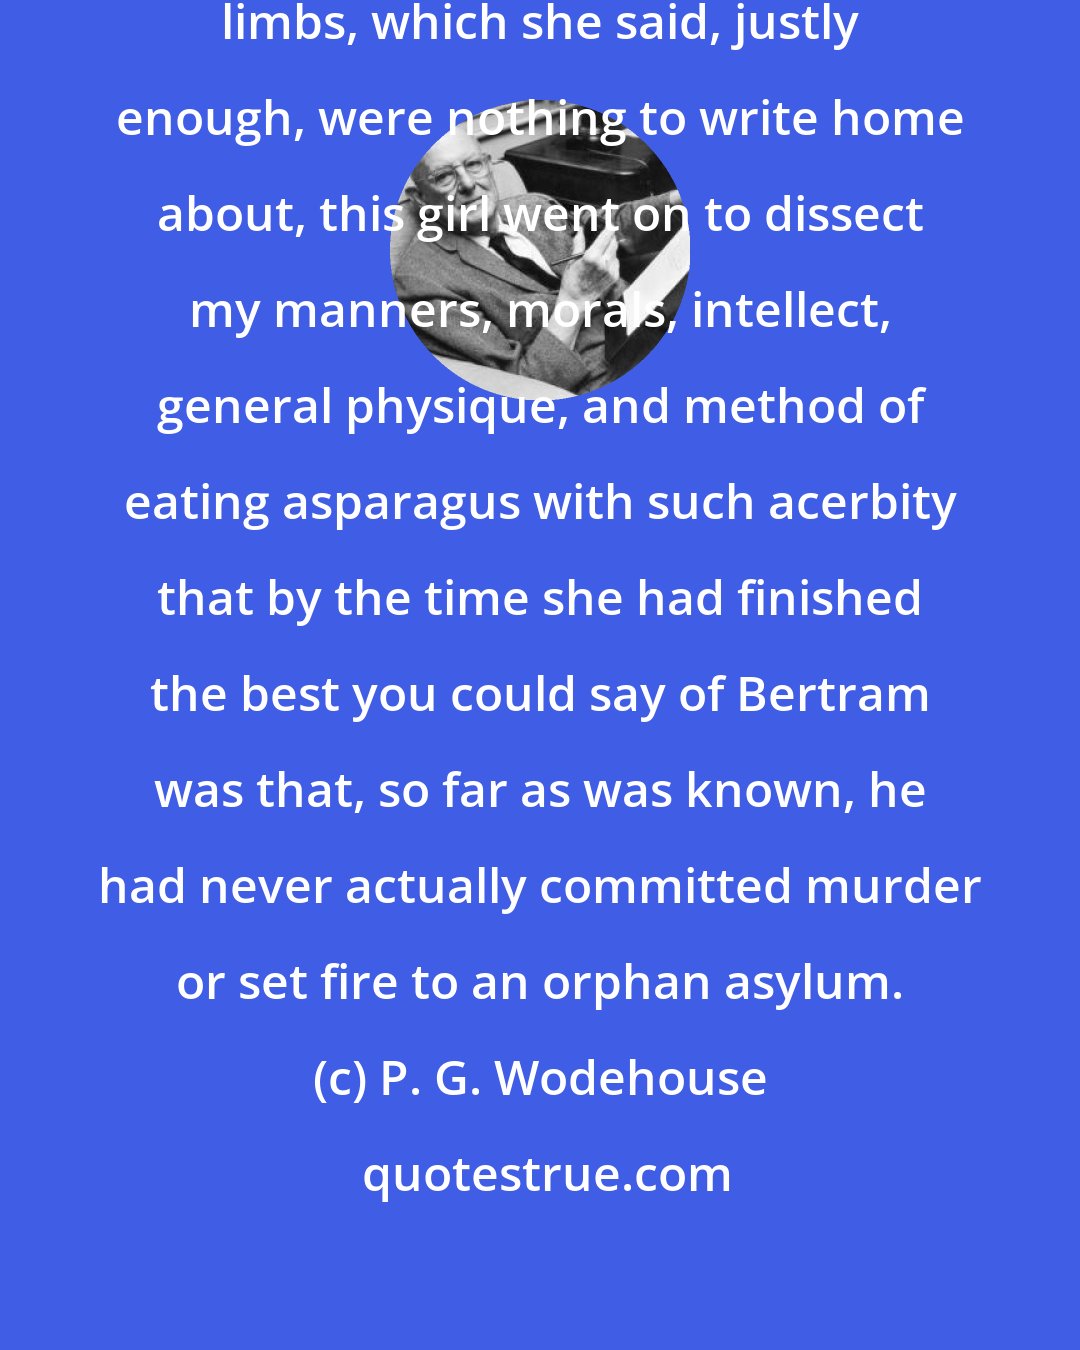 P. G. Wodehouse: Beginning with a critique of my own limbs, which she said, justly enough, were nothing to write home about, this girl went on to dissect my manners, morals, intellect, general physique, and method of eating asparagus with such acerbity that by the time she had finished the best you could say of Bertram was that, so far as was known, he had never actually committed murder or set fire to an orphan asylum.